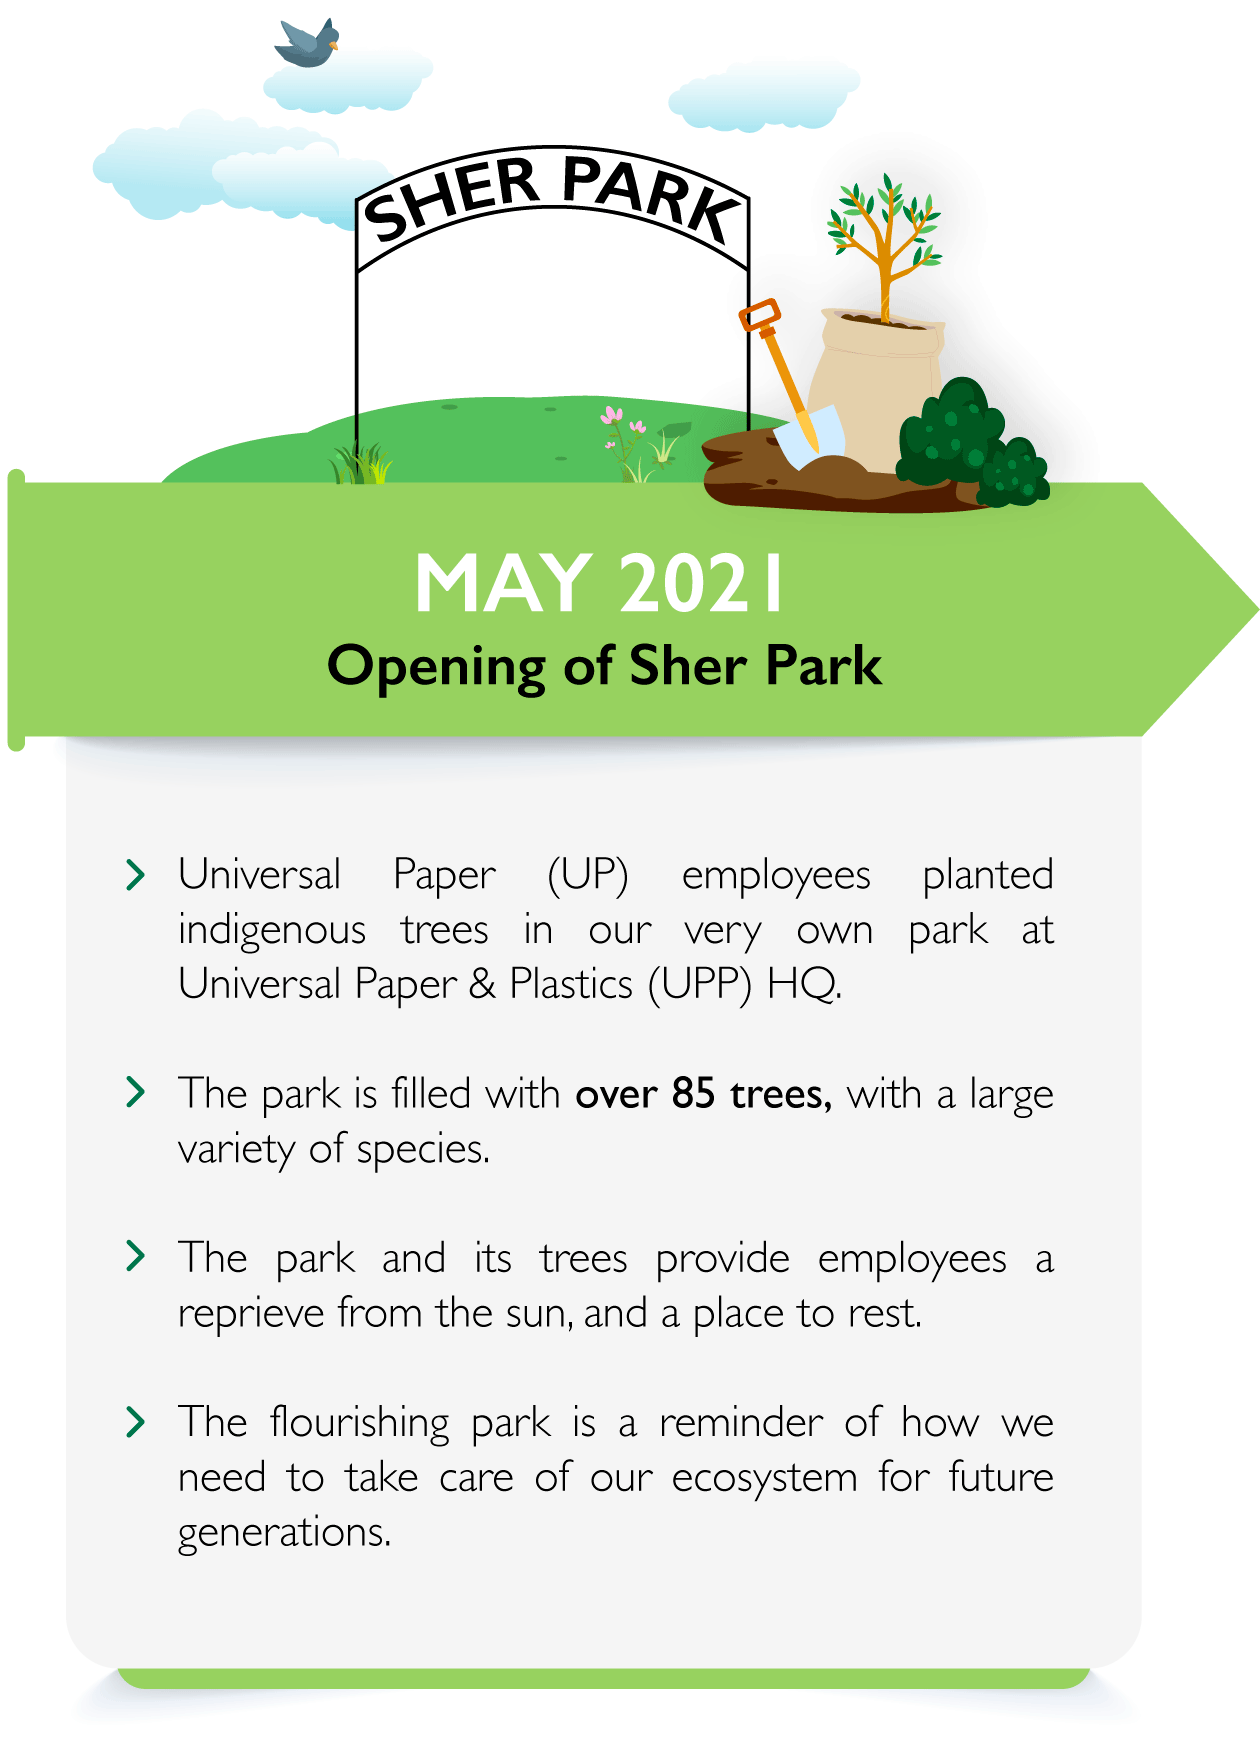 May 2021 - Opening of Sher Park